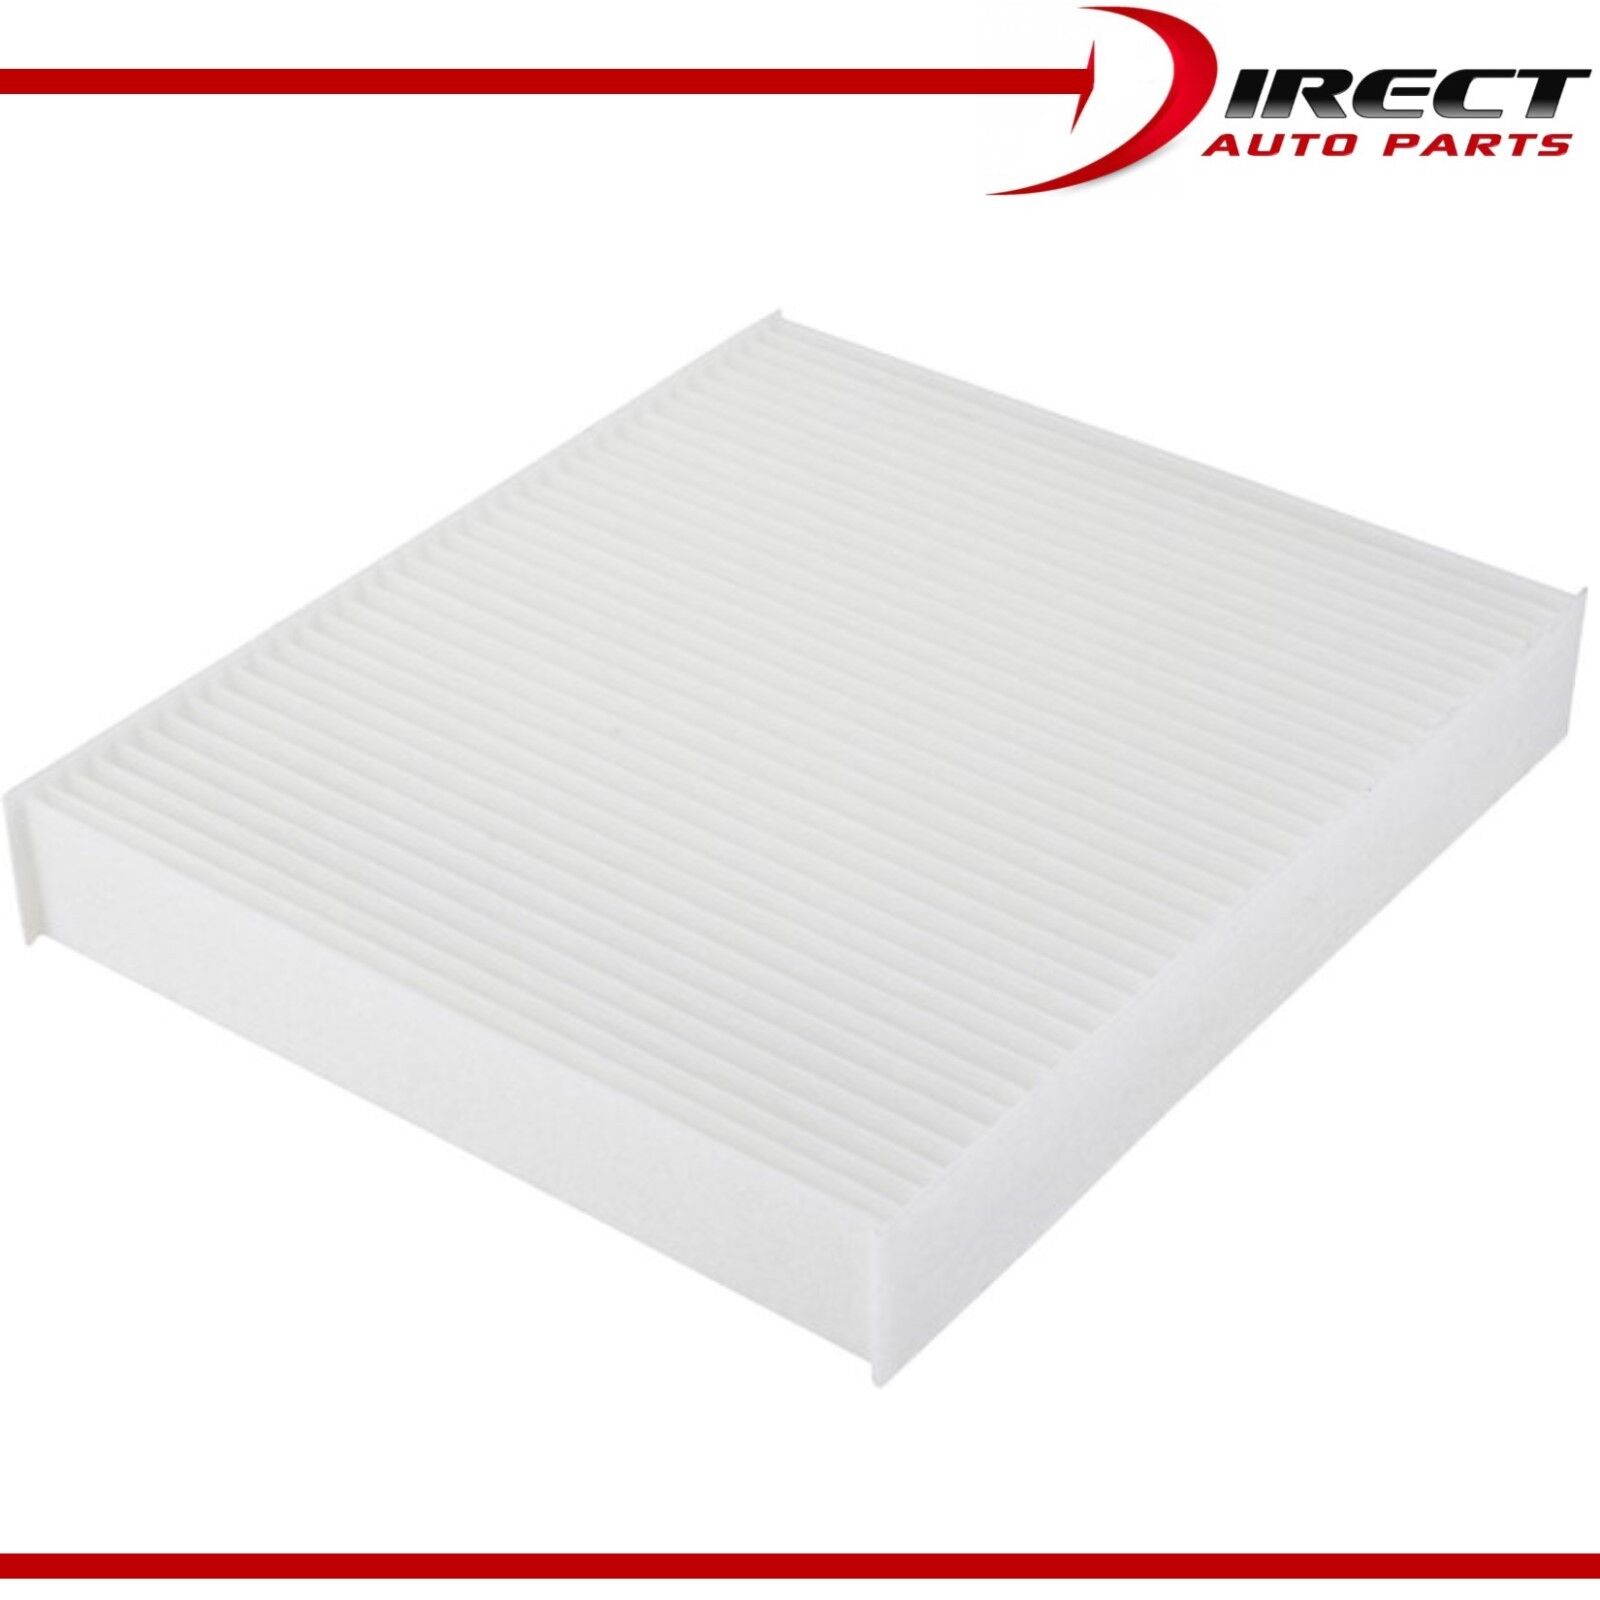 C45654 CABIN AIR FILTER For C E CTS STS SRX OE ...